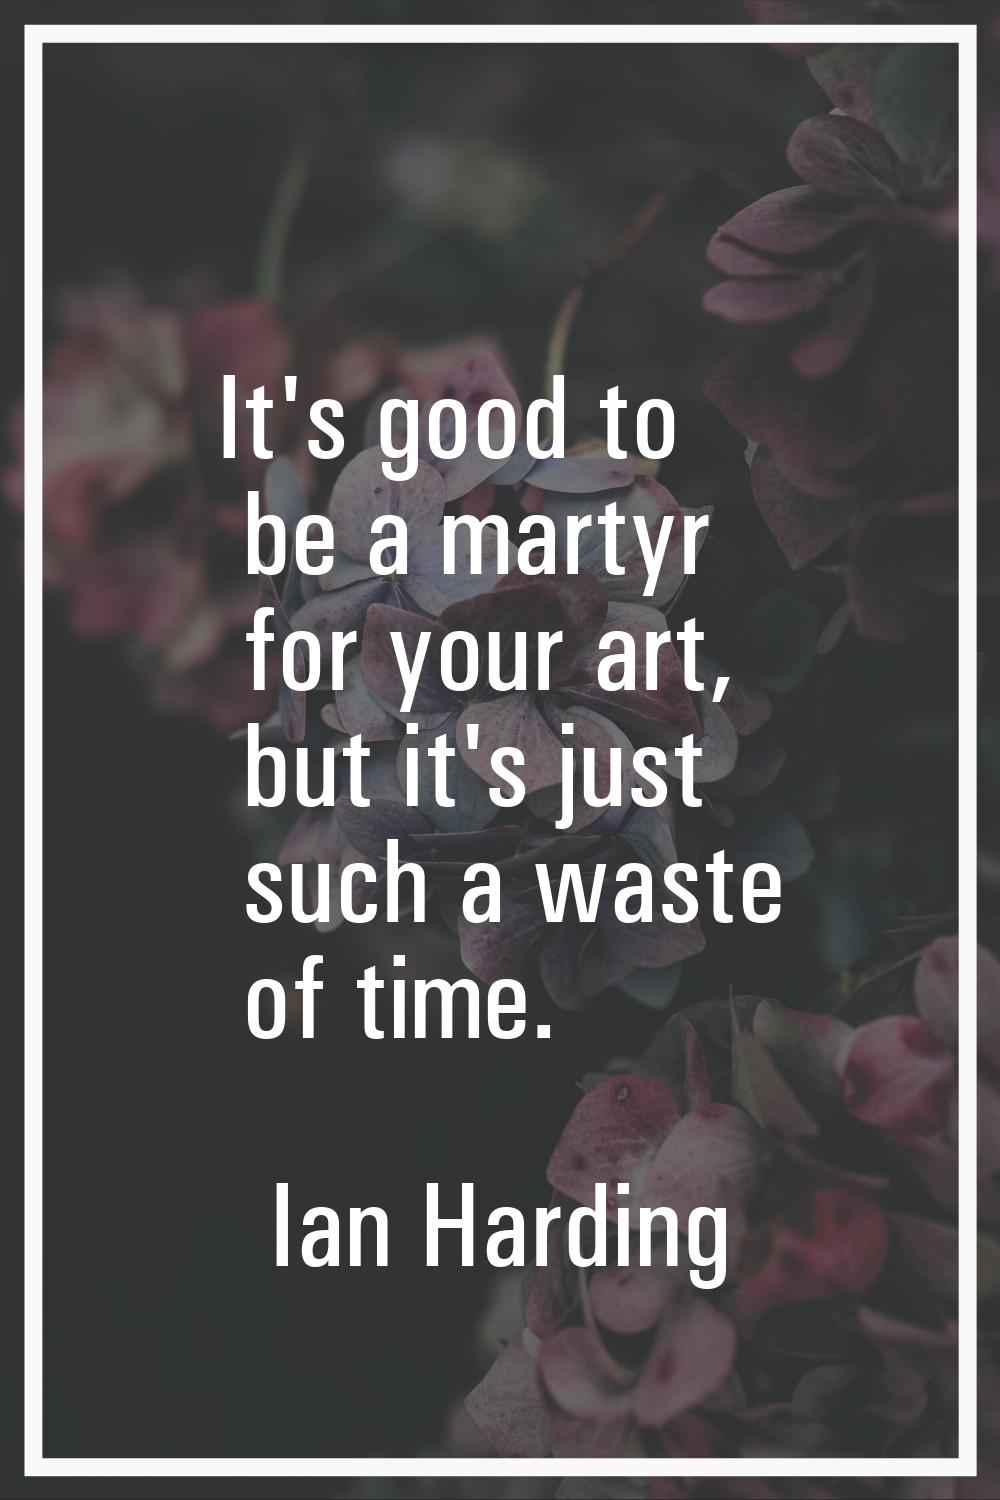 It's good to be a martyr for your art, but it's just such a waste of time.